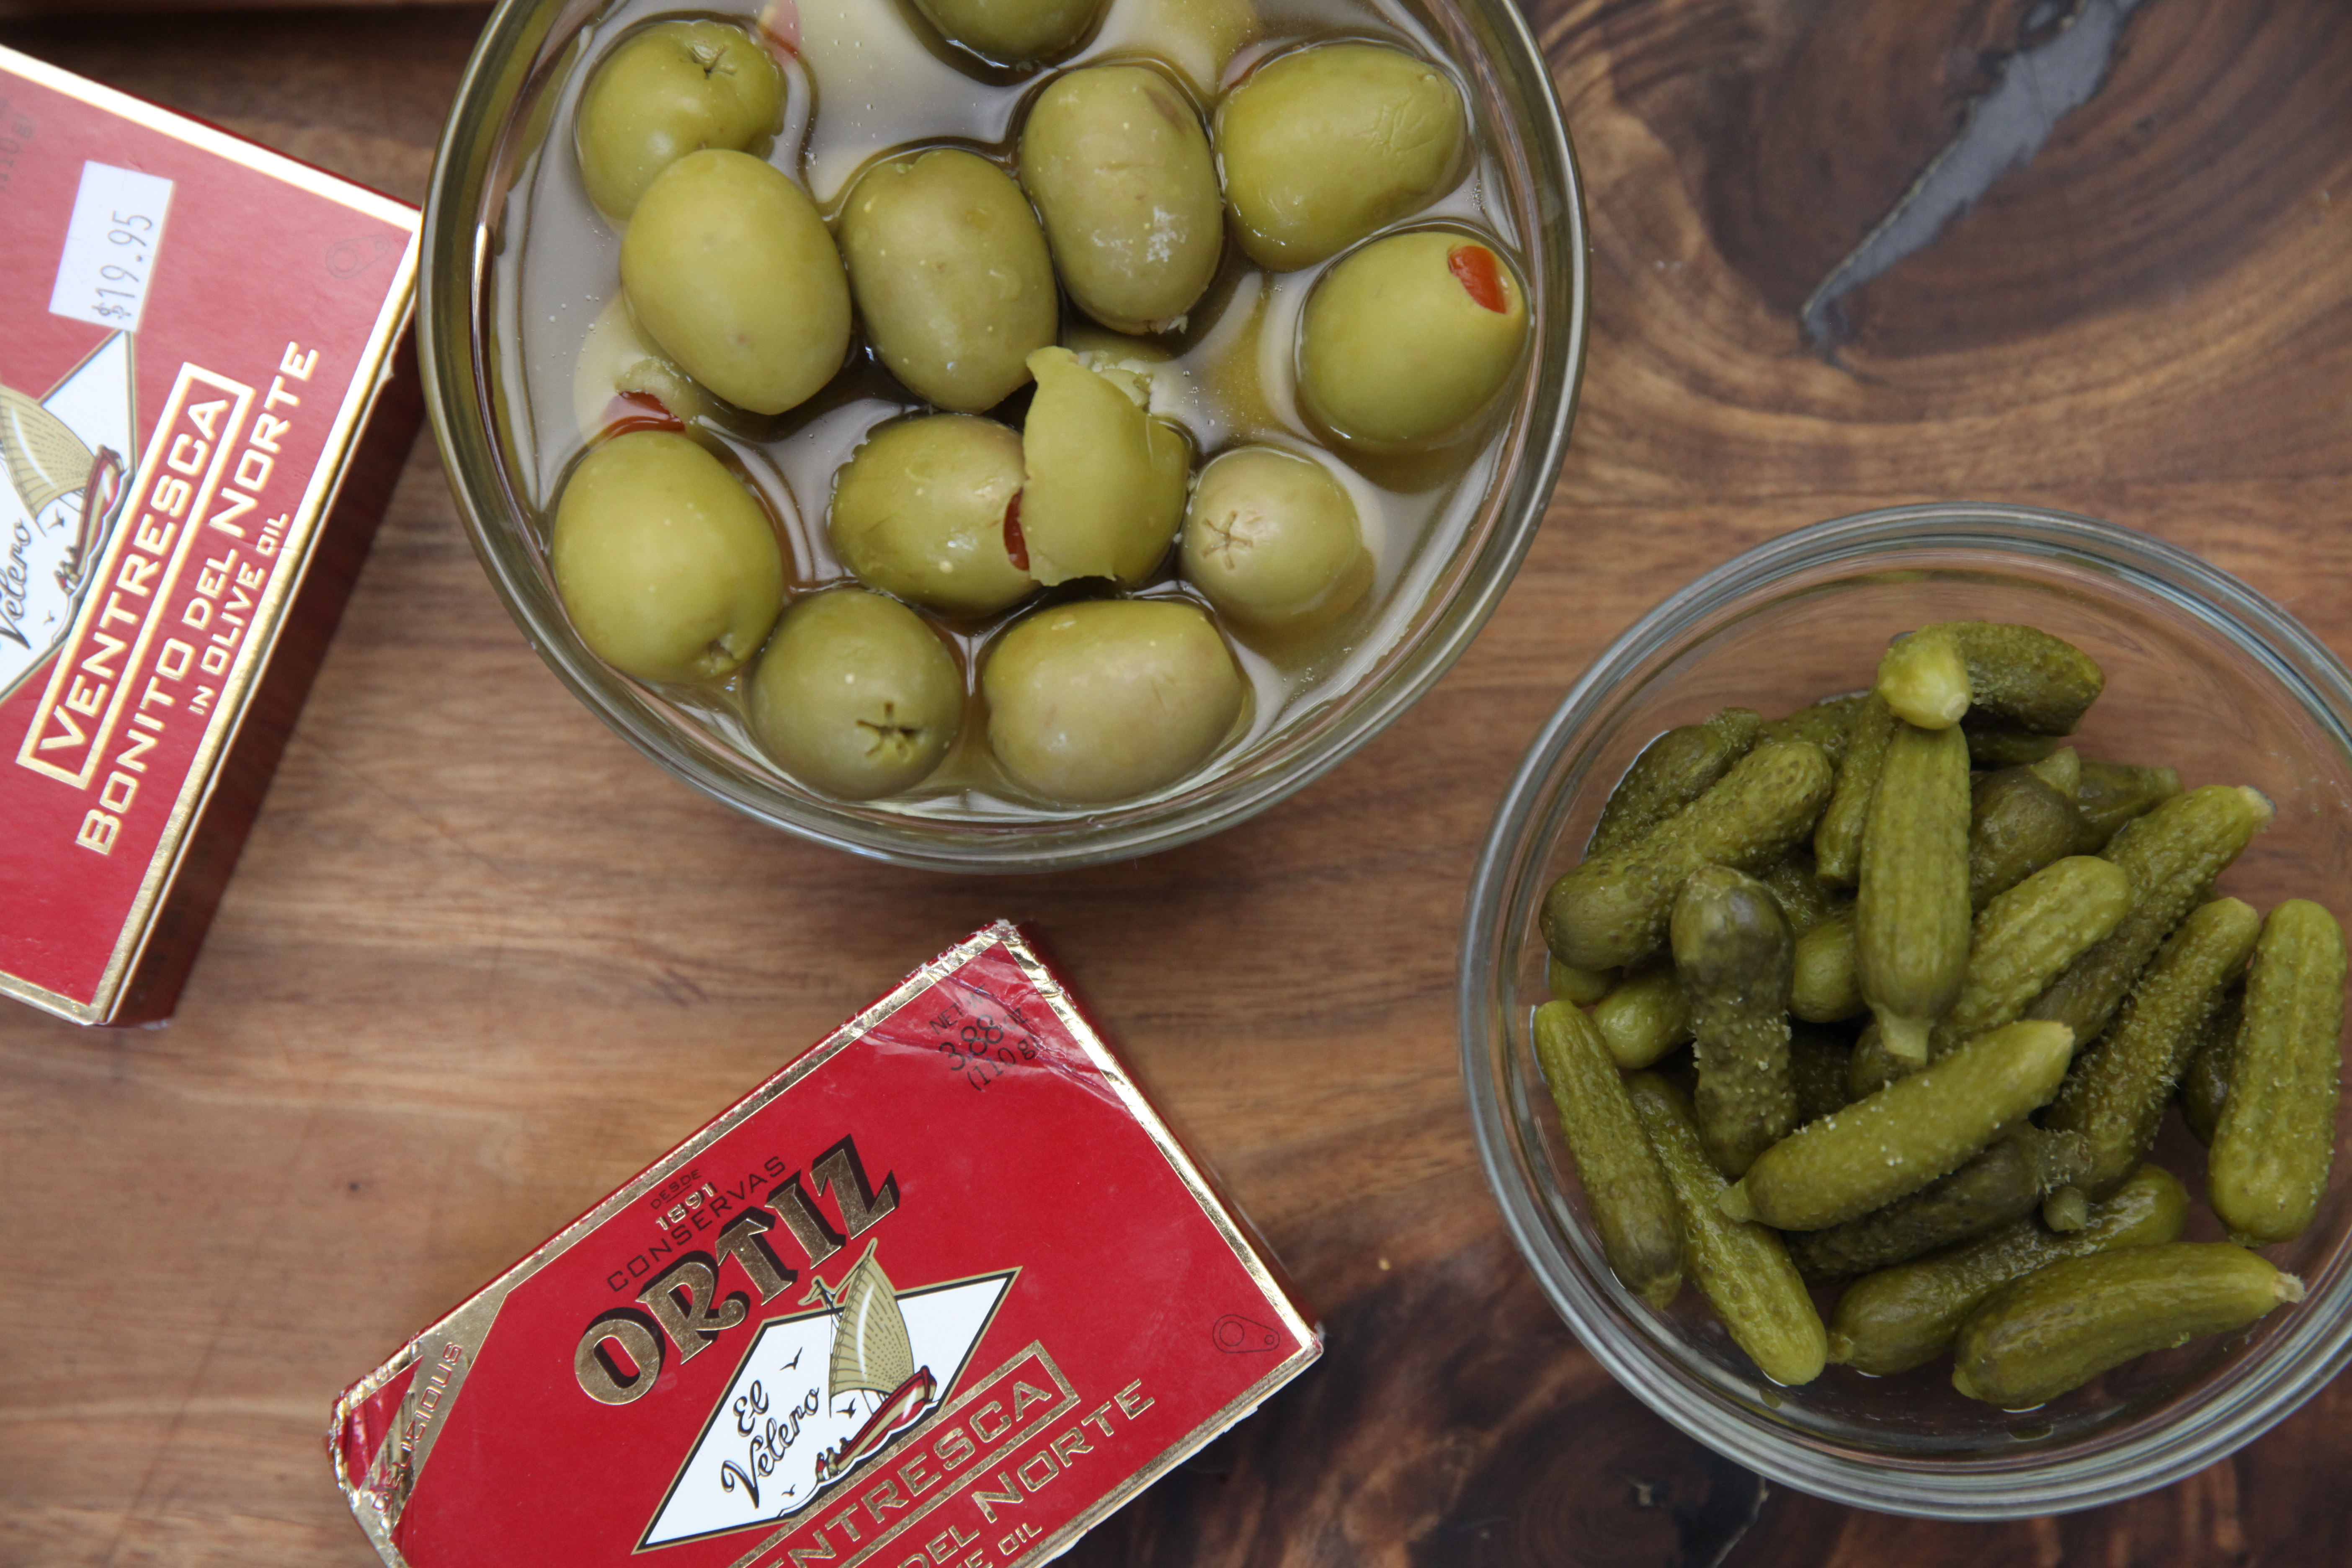 cans of ortiz ventresca tuna, a bowl of green olives with pimento, and a bowl of cornichons